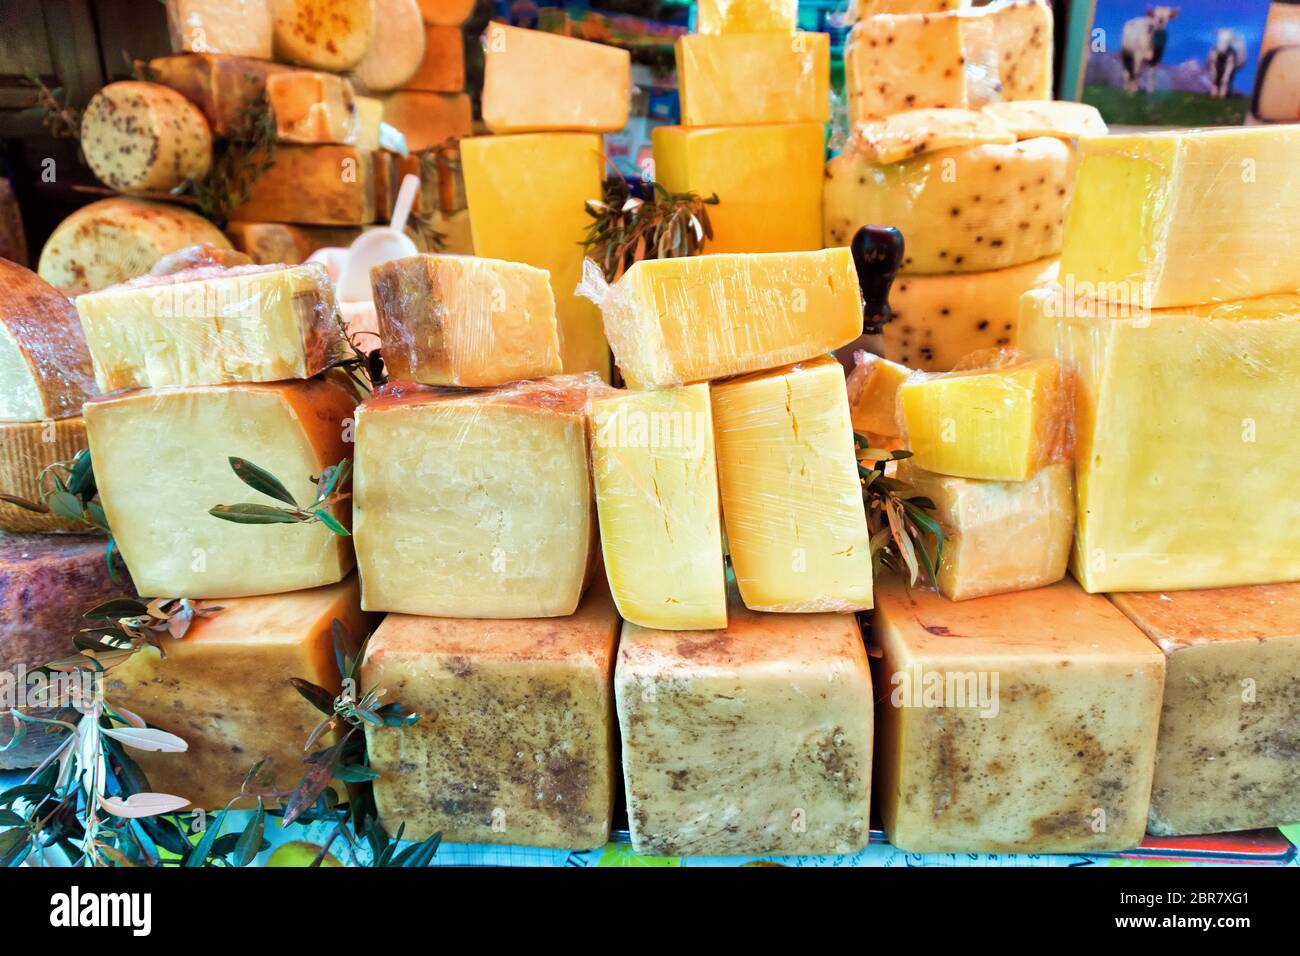 Market with variety of traditional and aged cheeses in Palermo, Italy Stock Photo